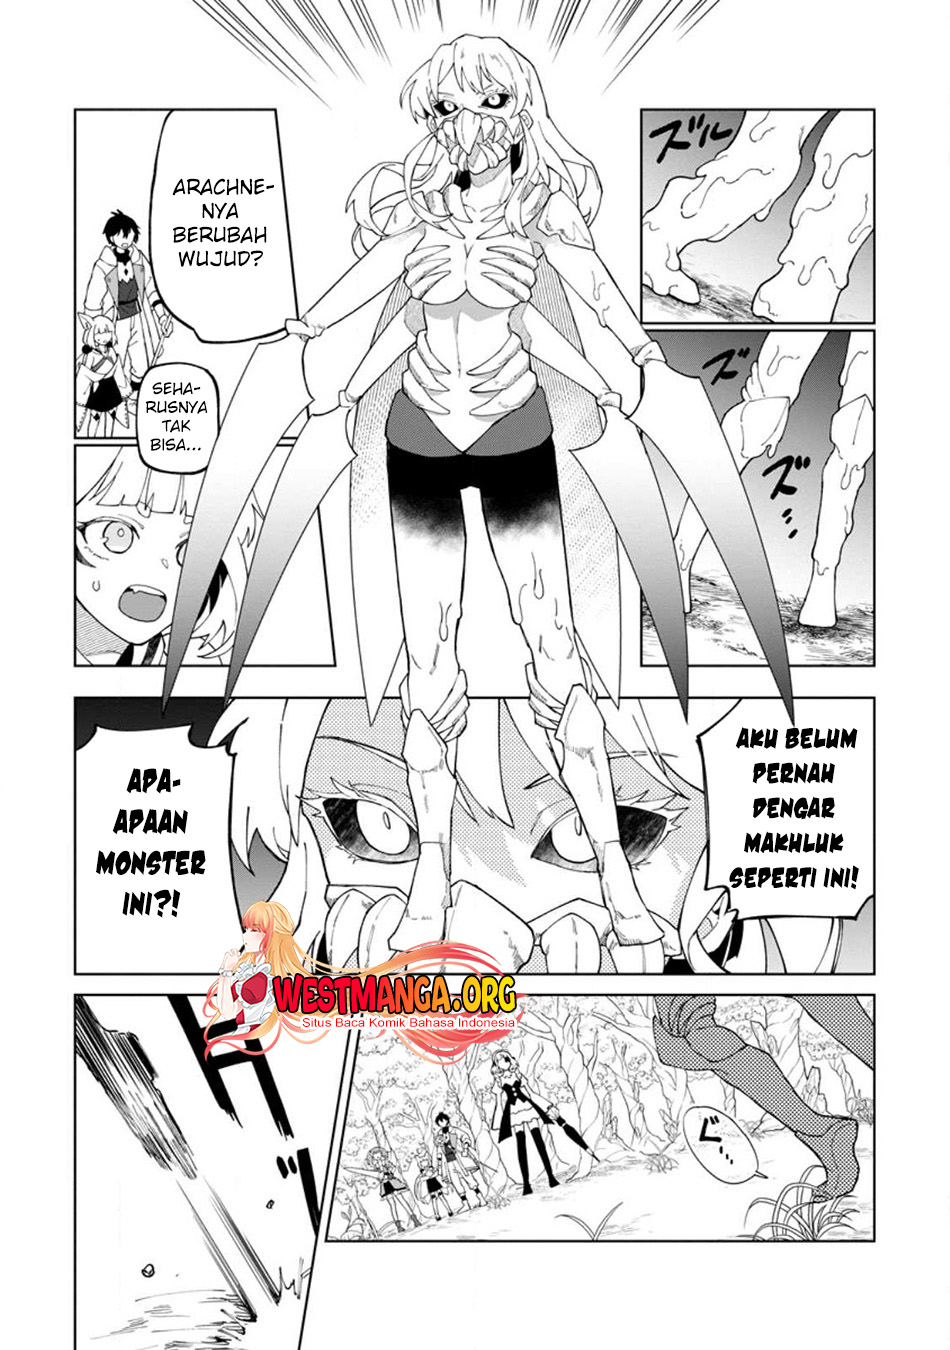 The White Mage Who Was Banished From the Hero’s Party Is Picked up by an S Rank Adventurer ~ This White Mage Is Too Out of the Ordinary! Chapter 26.1